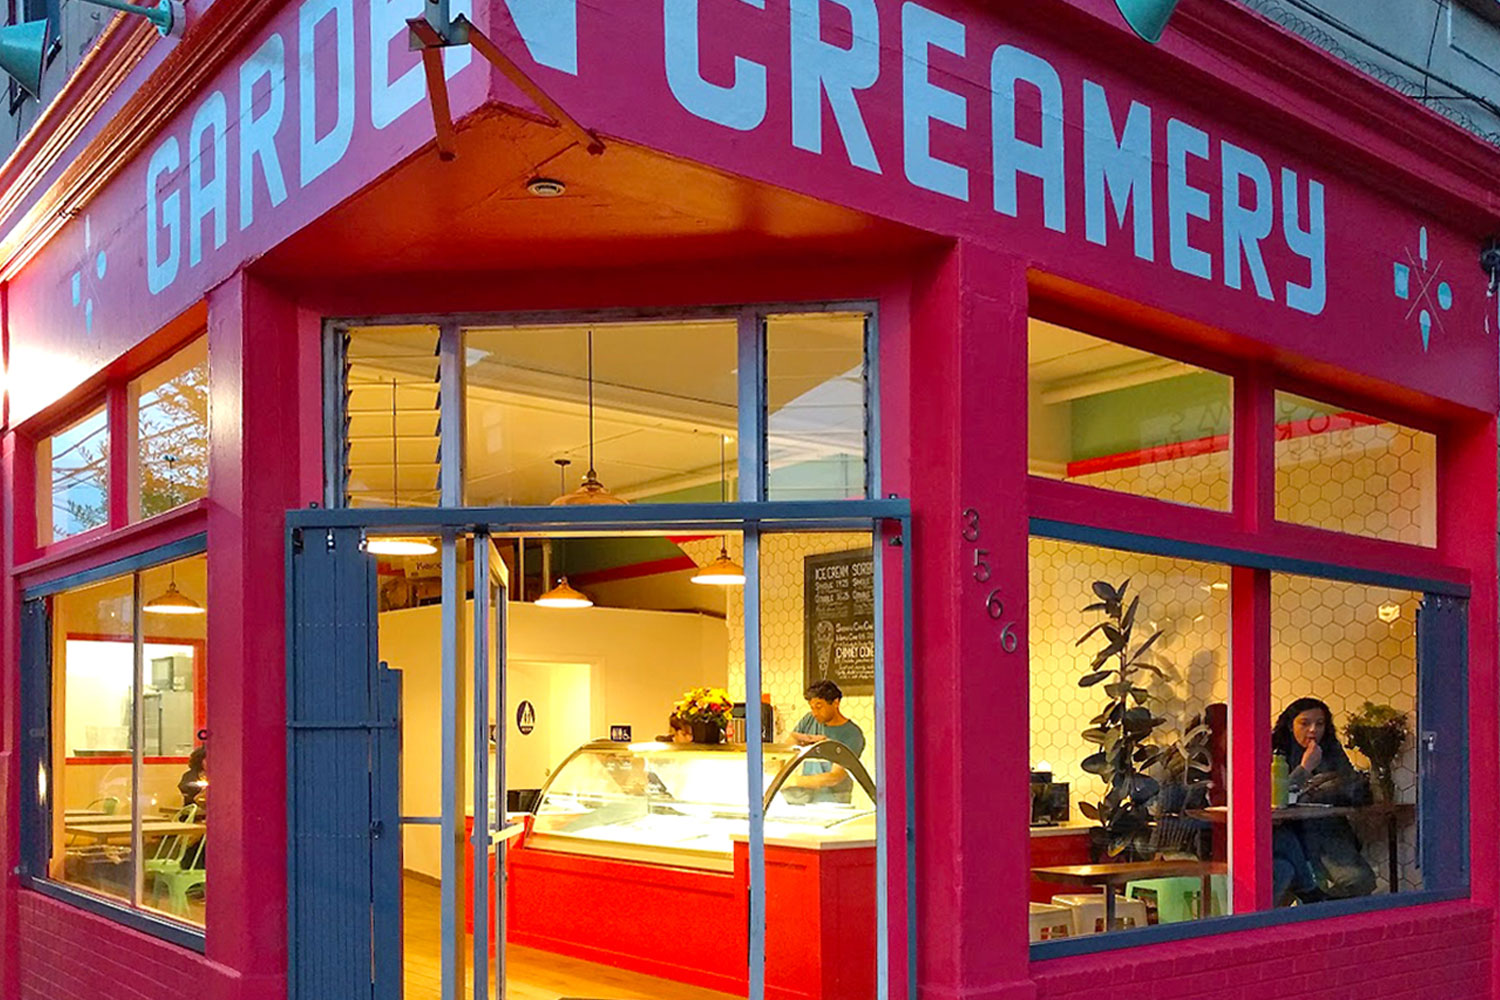 Ice cream shop. Exterior painted bright red. Large windows. Interior has custom lighting, countertops, and white tiled walls.